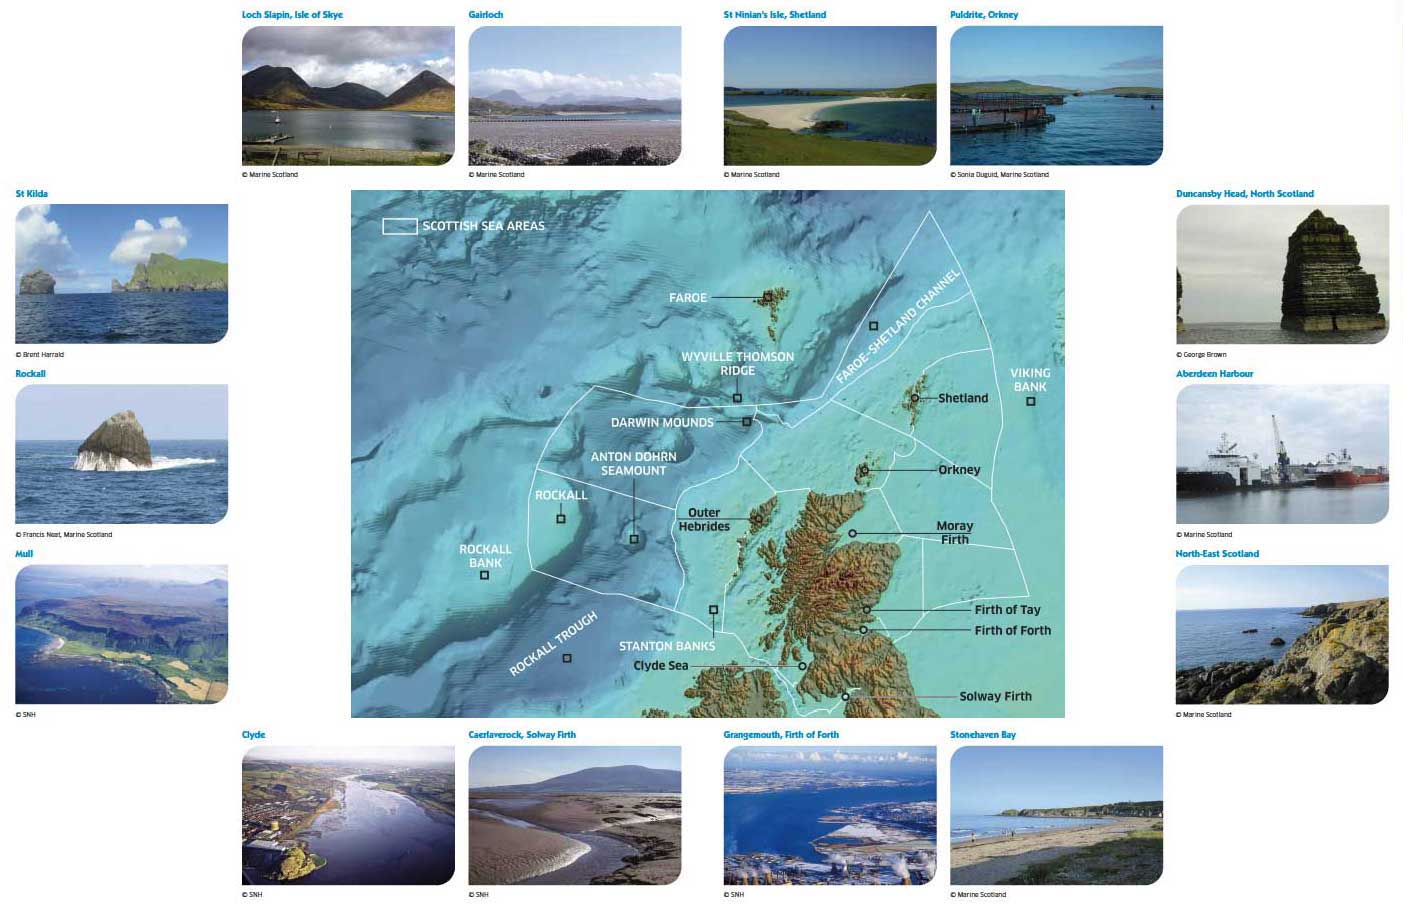 Bathymetry and selected features of the seas around Scotland